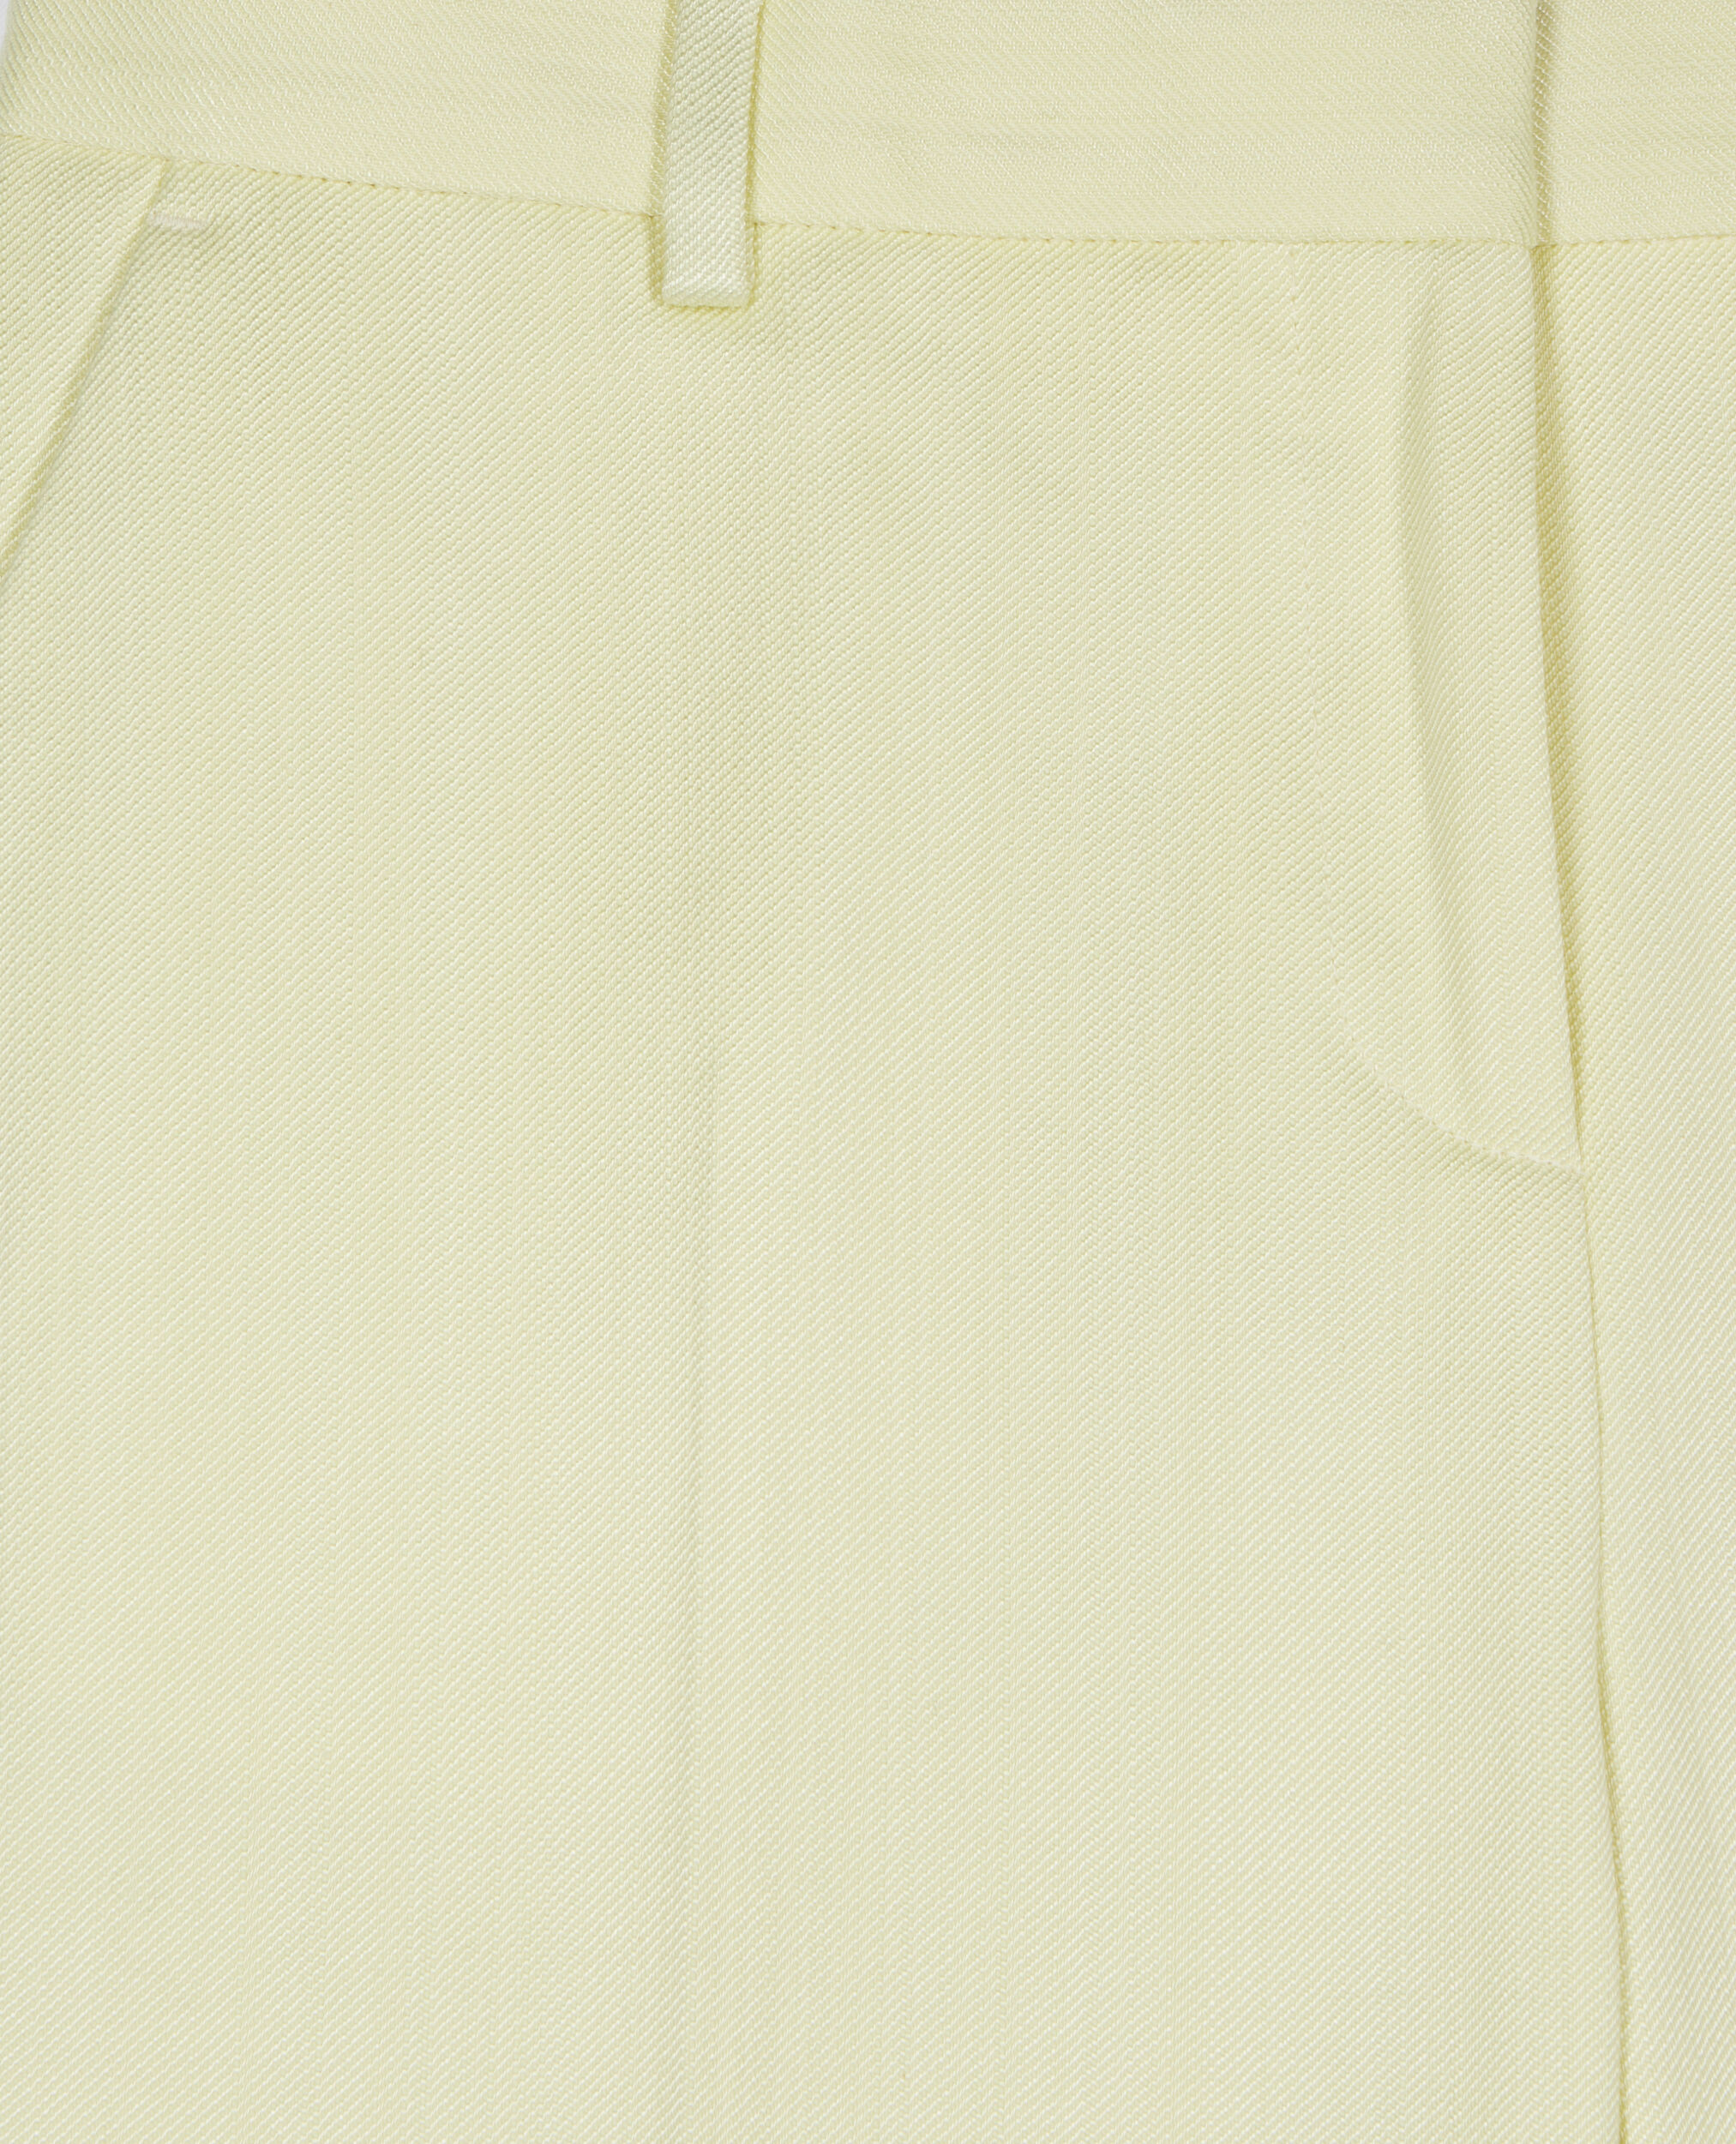 Light yellow suit trousers, BRIGHT YELLOW, hi-res image number null